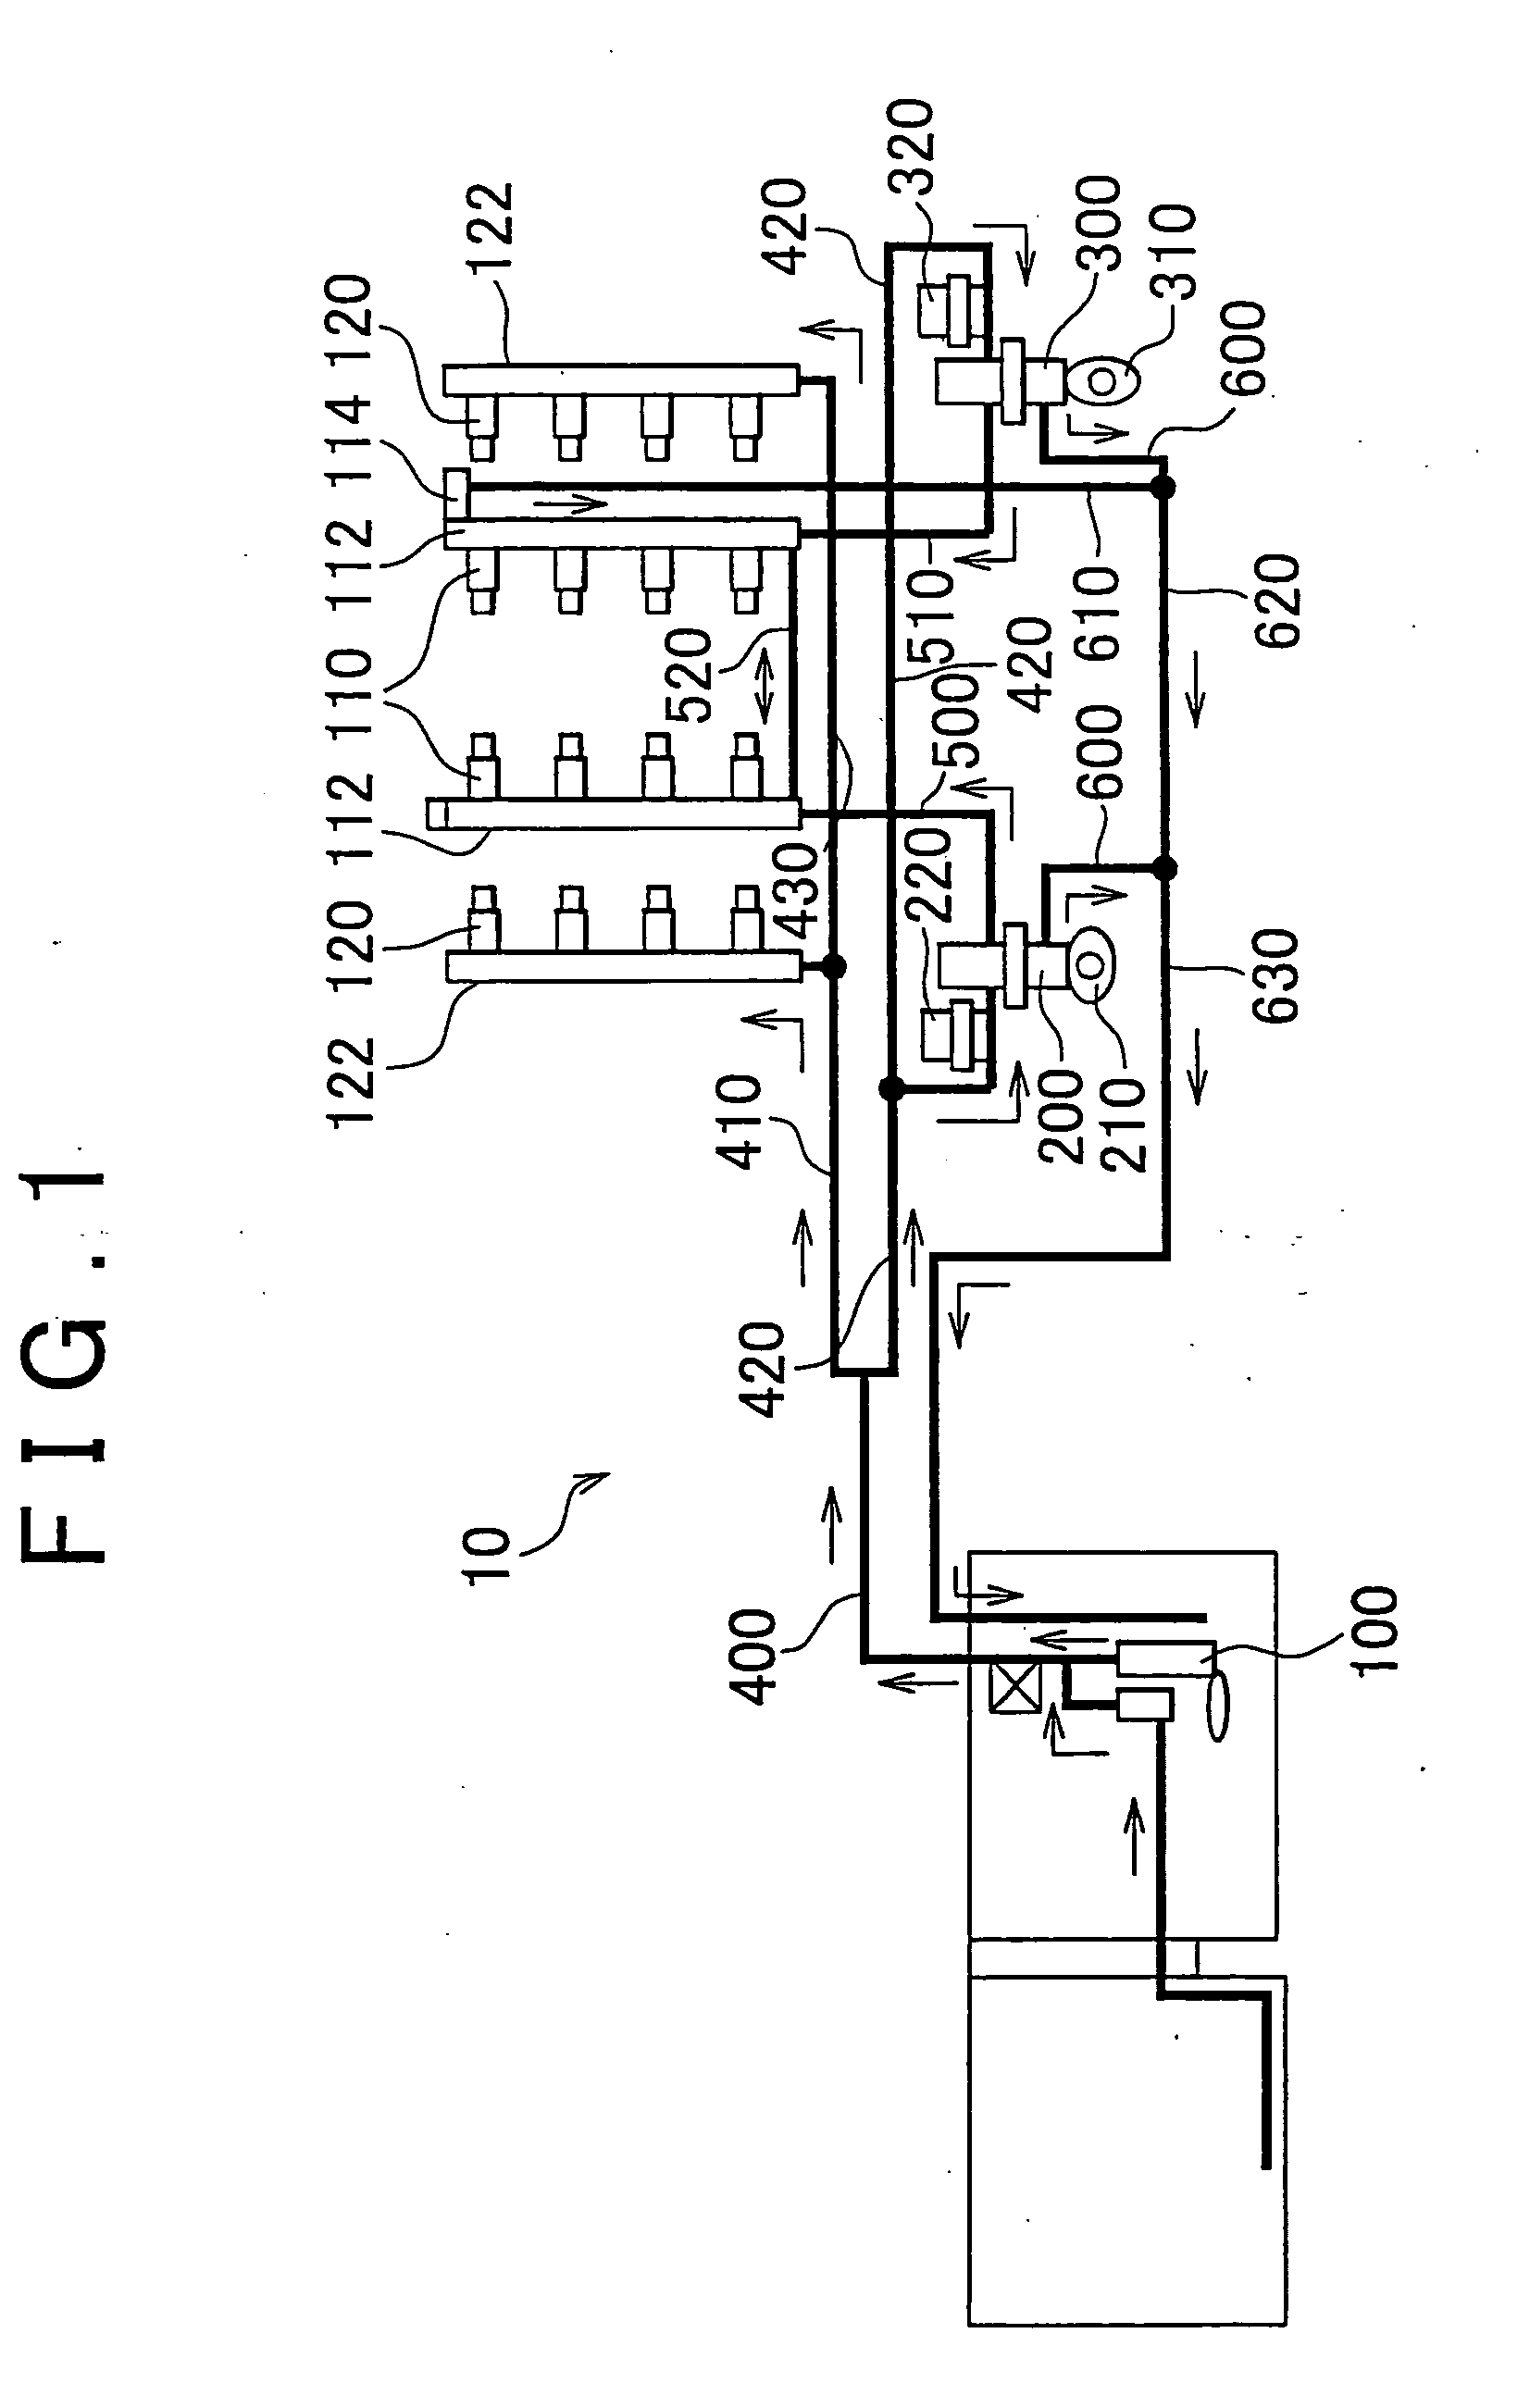 Fuel Supply System For An Internal Combustion Engine